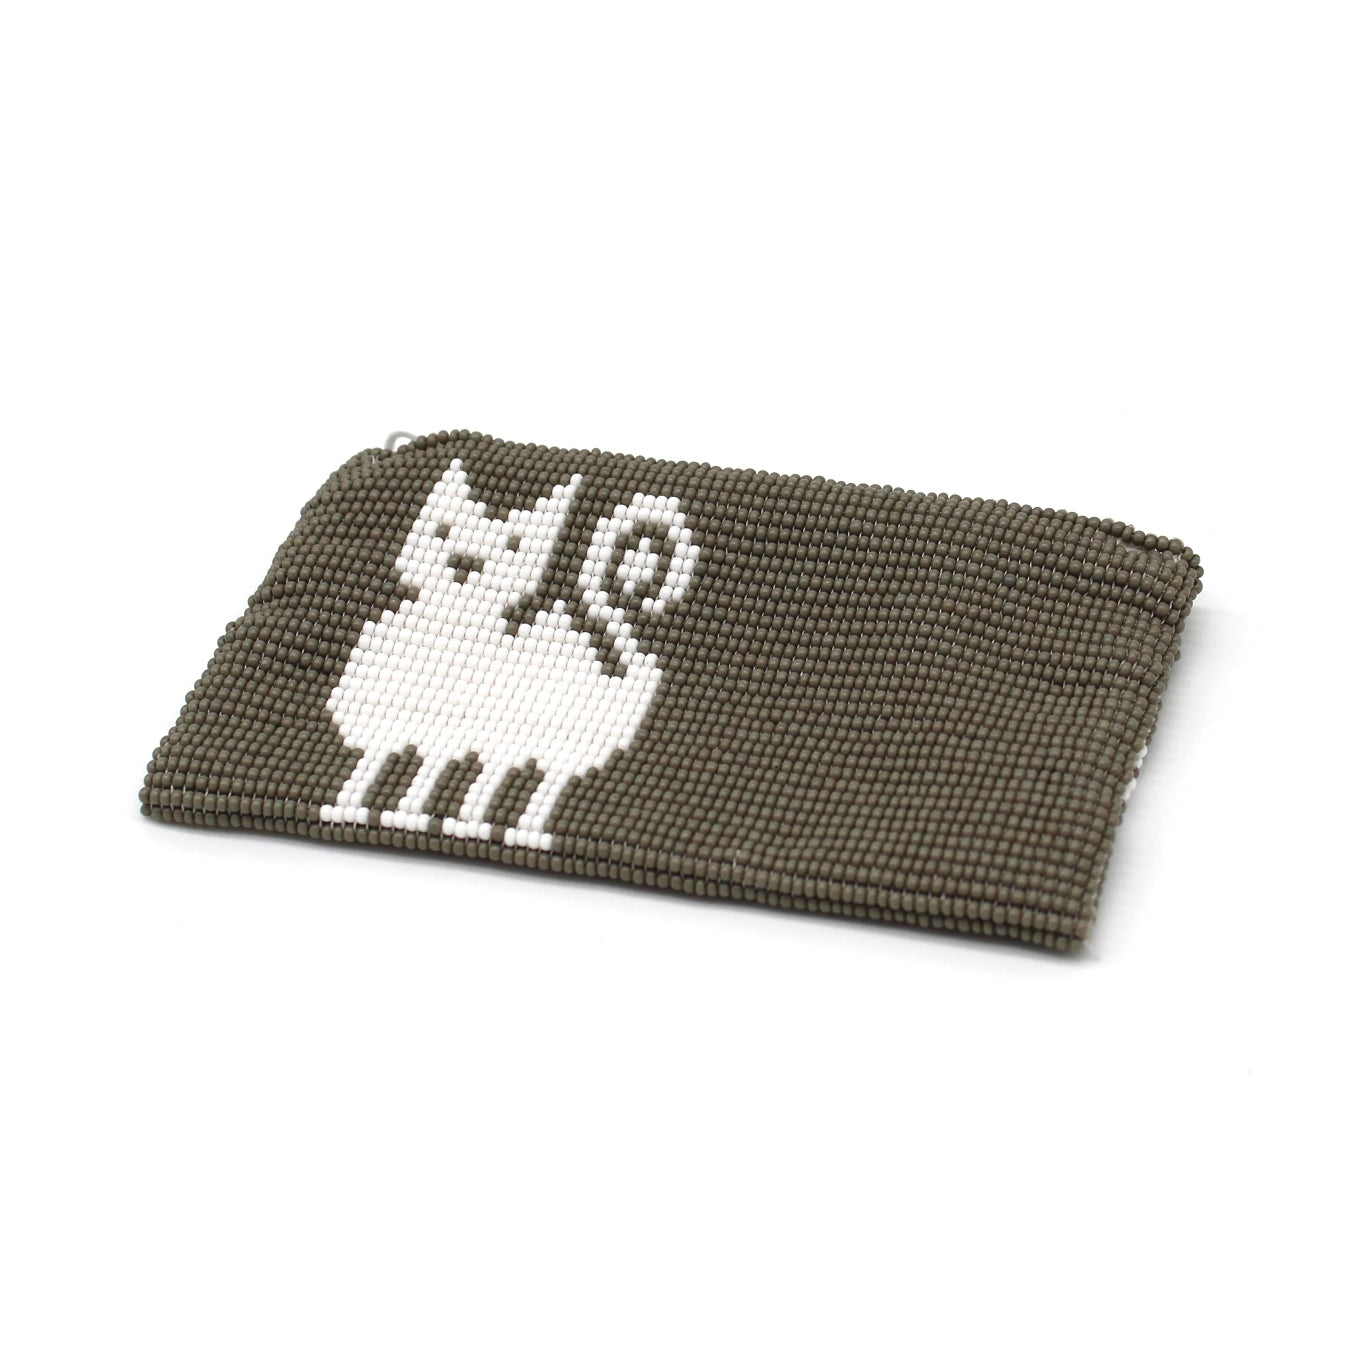 Glass bead coin purse - Cat White